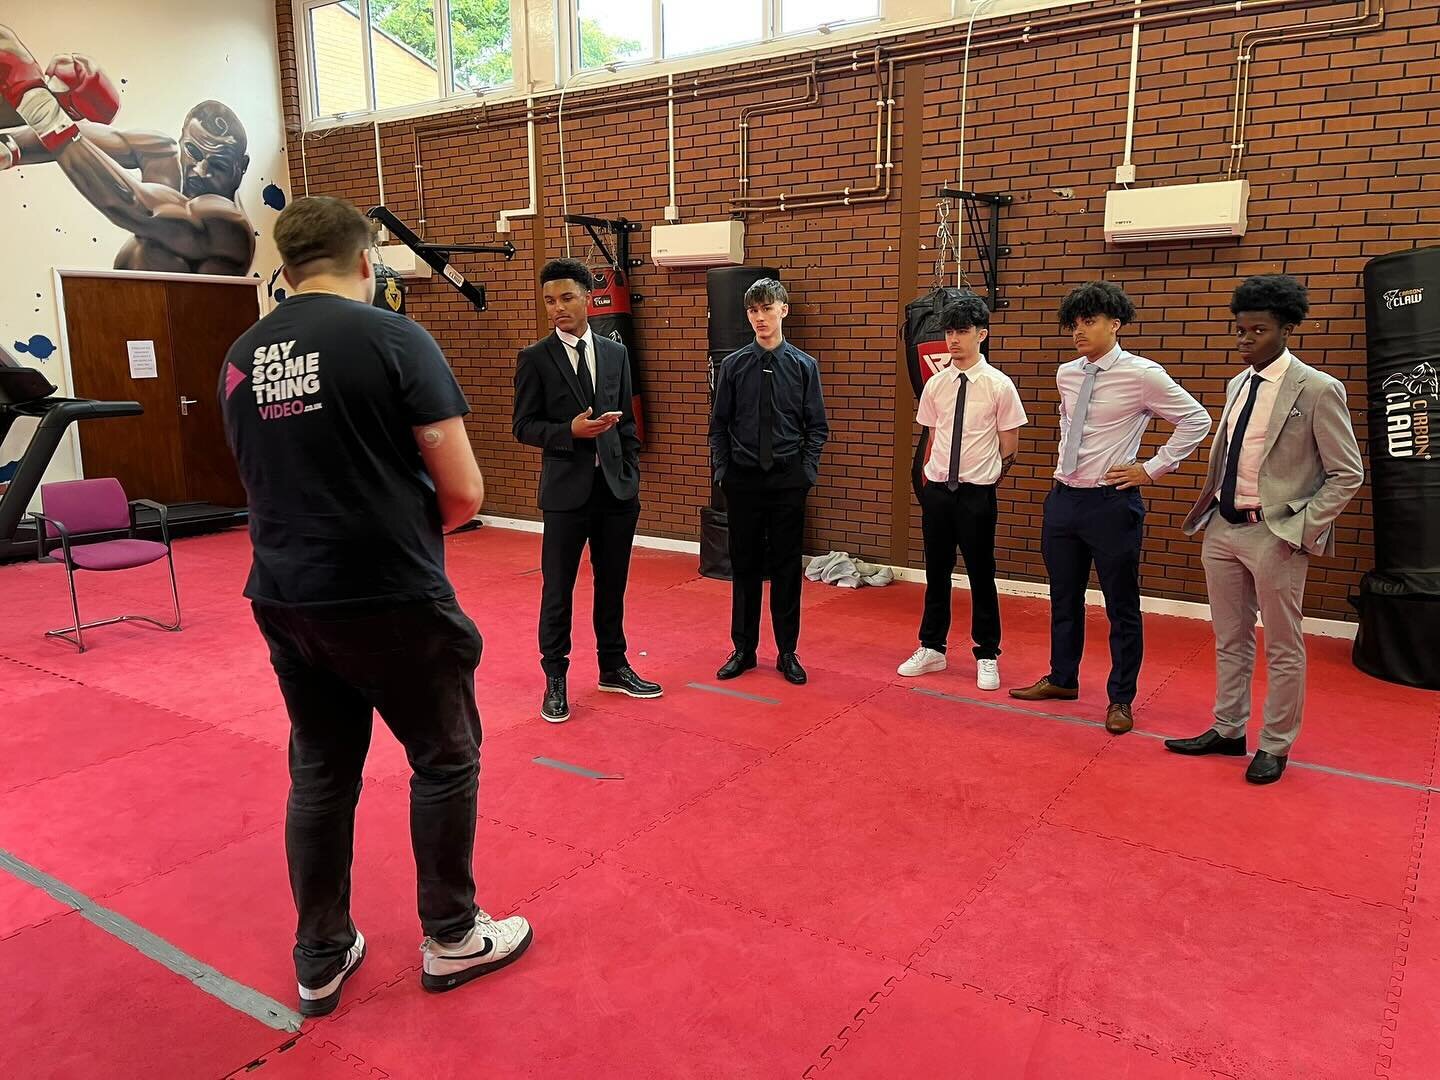 This morning I had the privilege of meeting with Level 3 business students from @northamptoncollege.

The business students are working with @frankbrunofoundation on their fight night coming up in April, so today was about hearing their ideas for vid